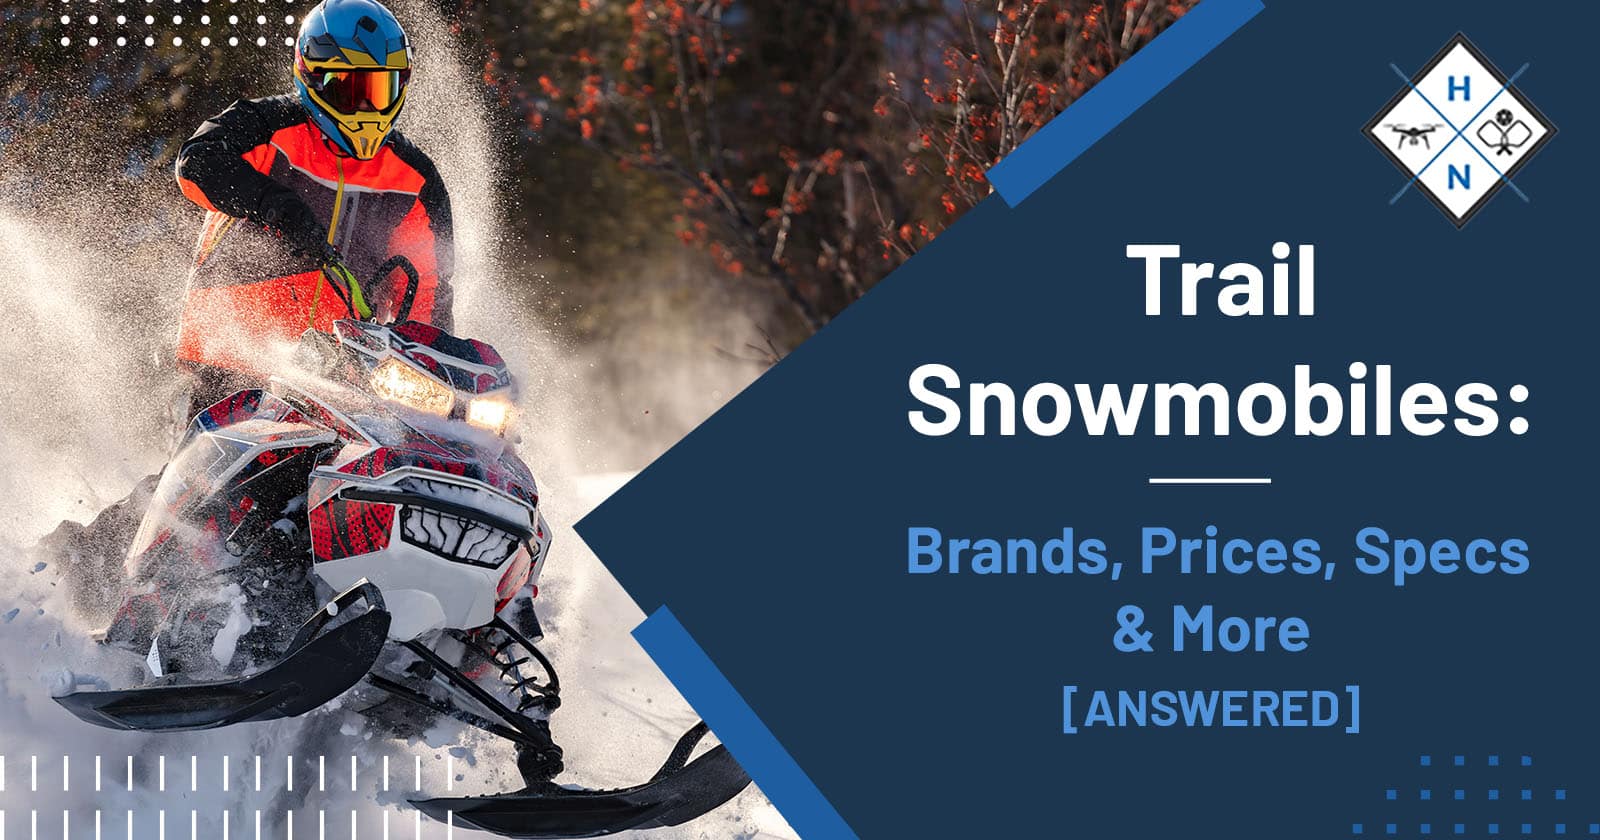 Trail Snowmobiles: Brands, Prices, Specs & More